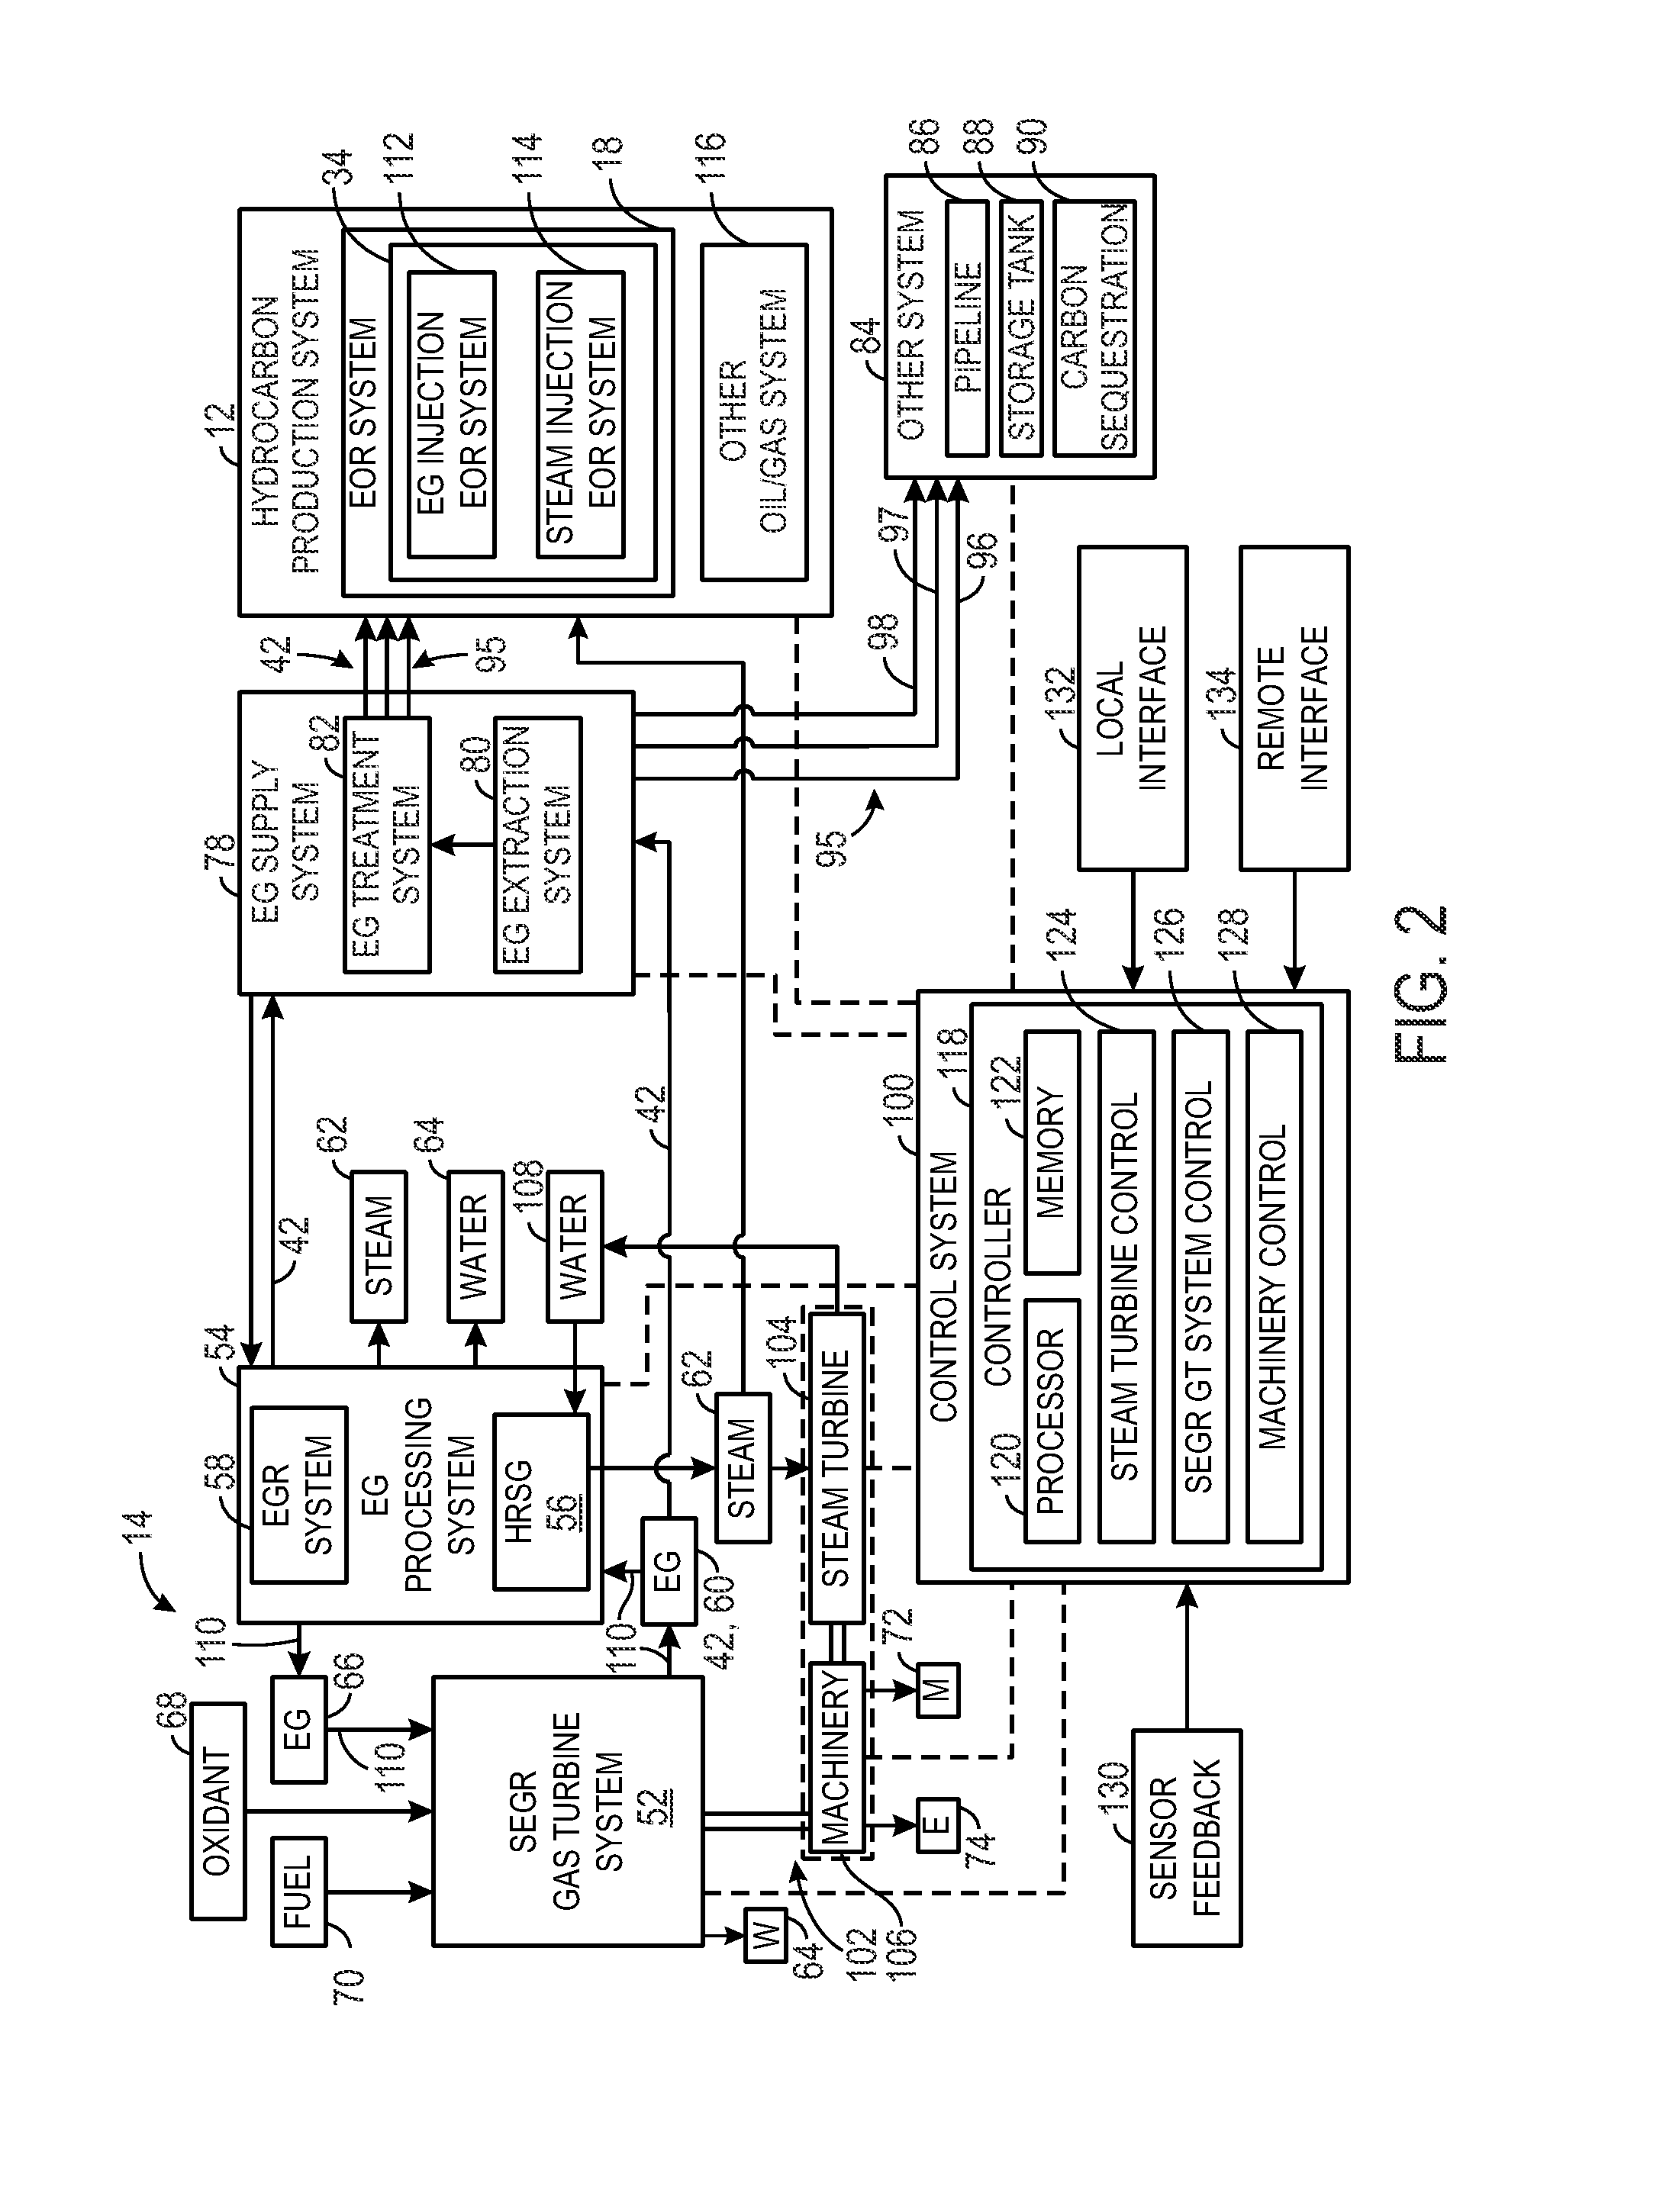 Stoichiometric combustion control for gas turbine system with exhaust gas recirculation